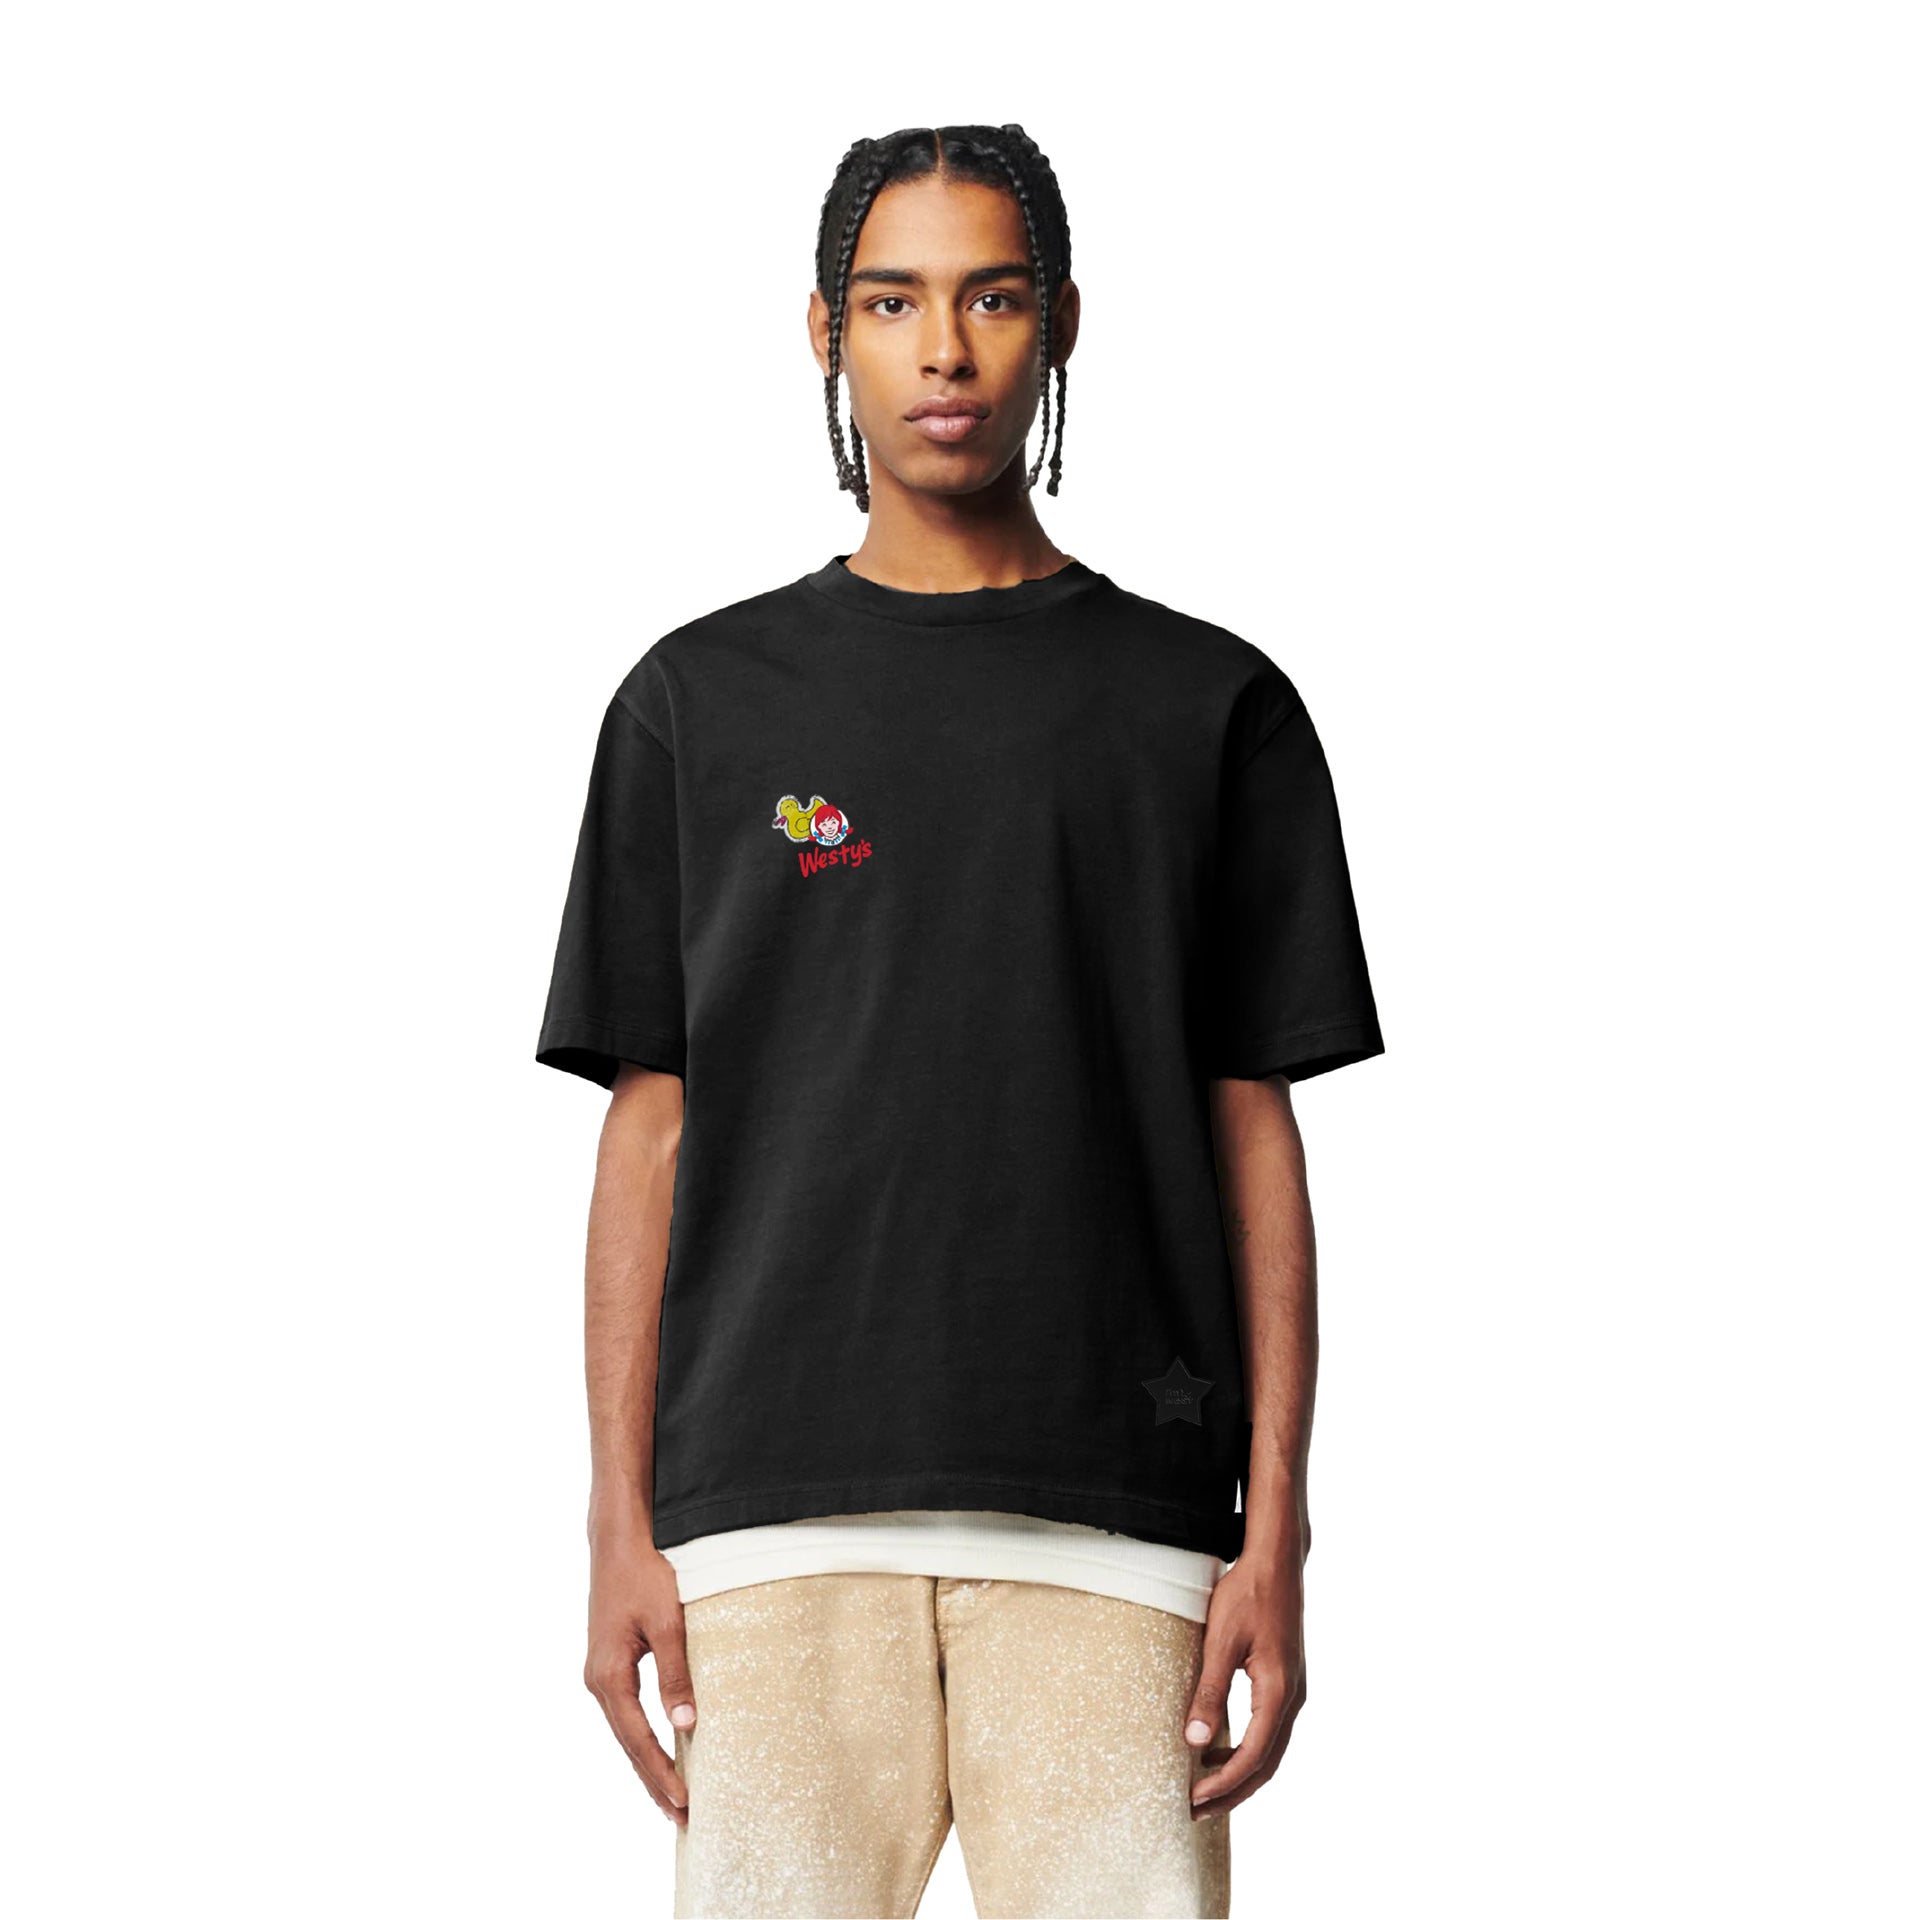 Black T-shirt From I'm West